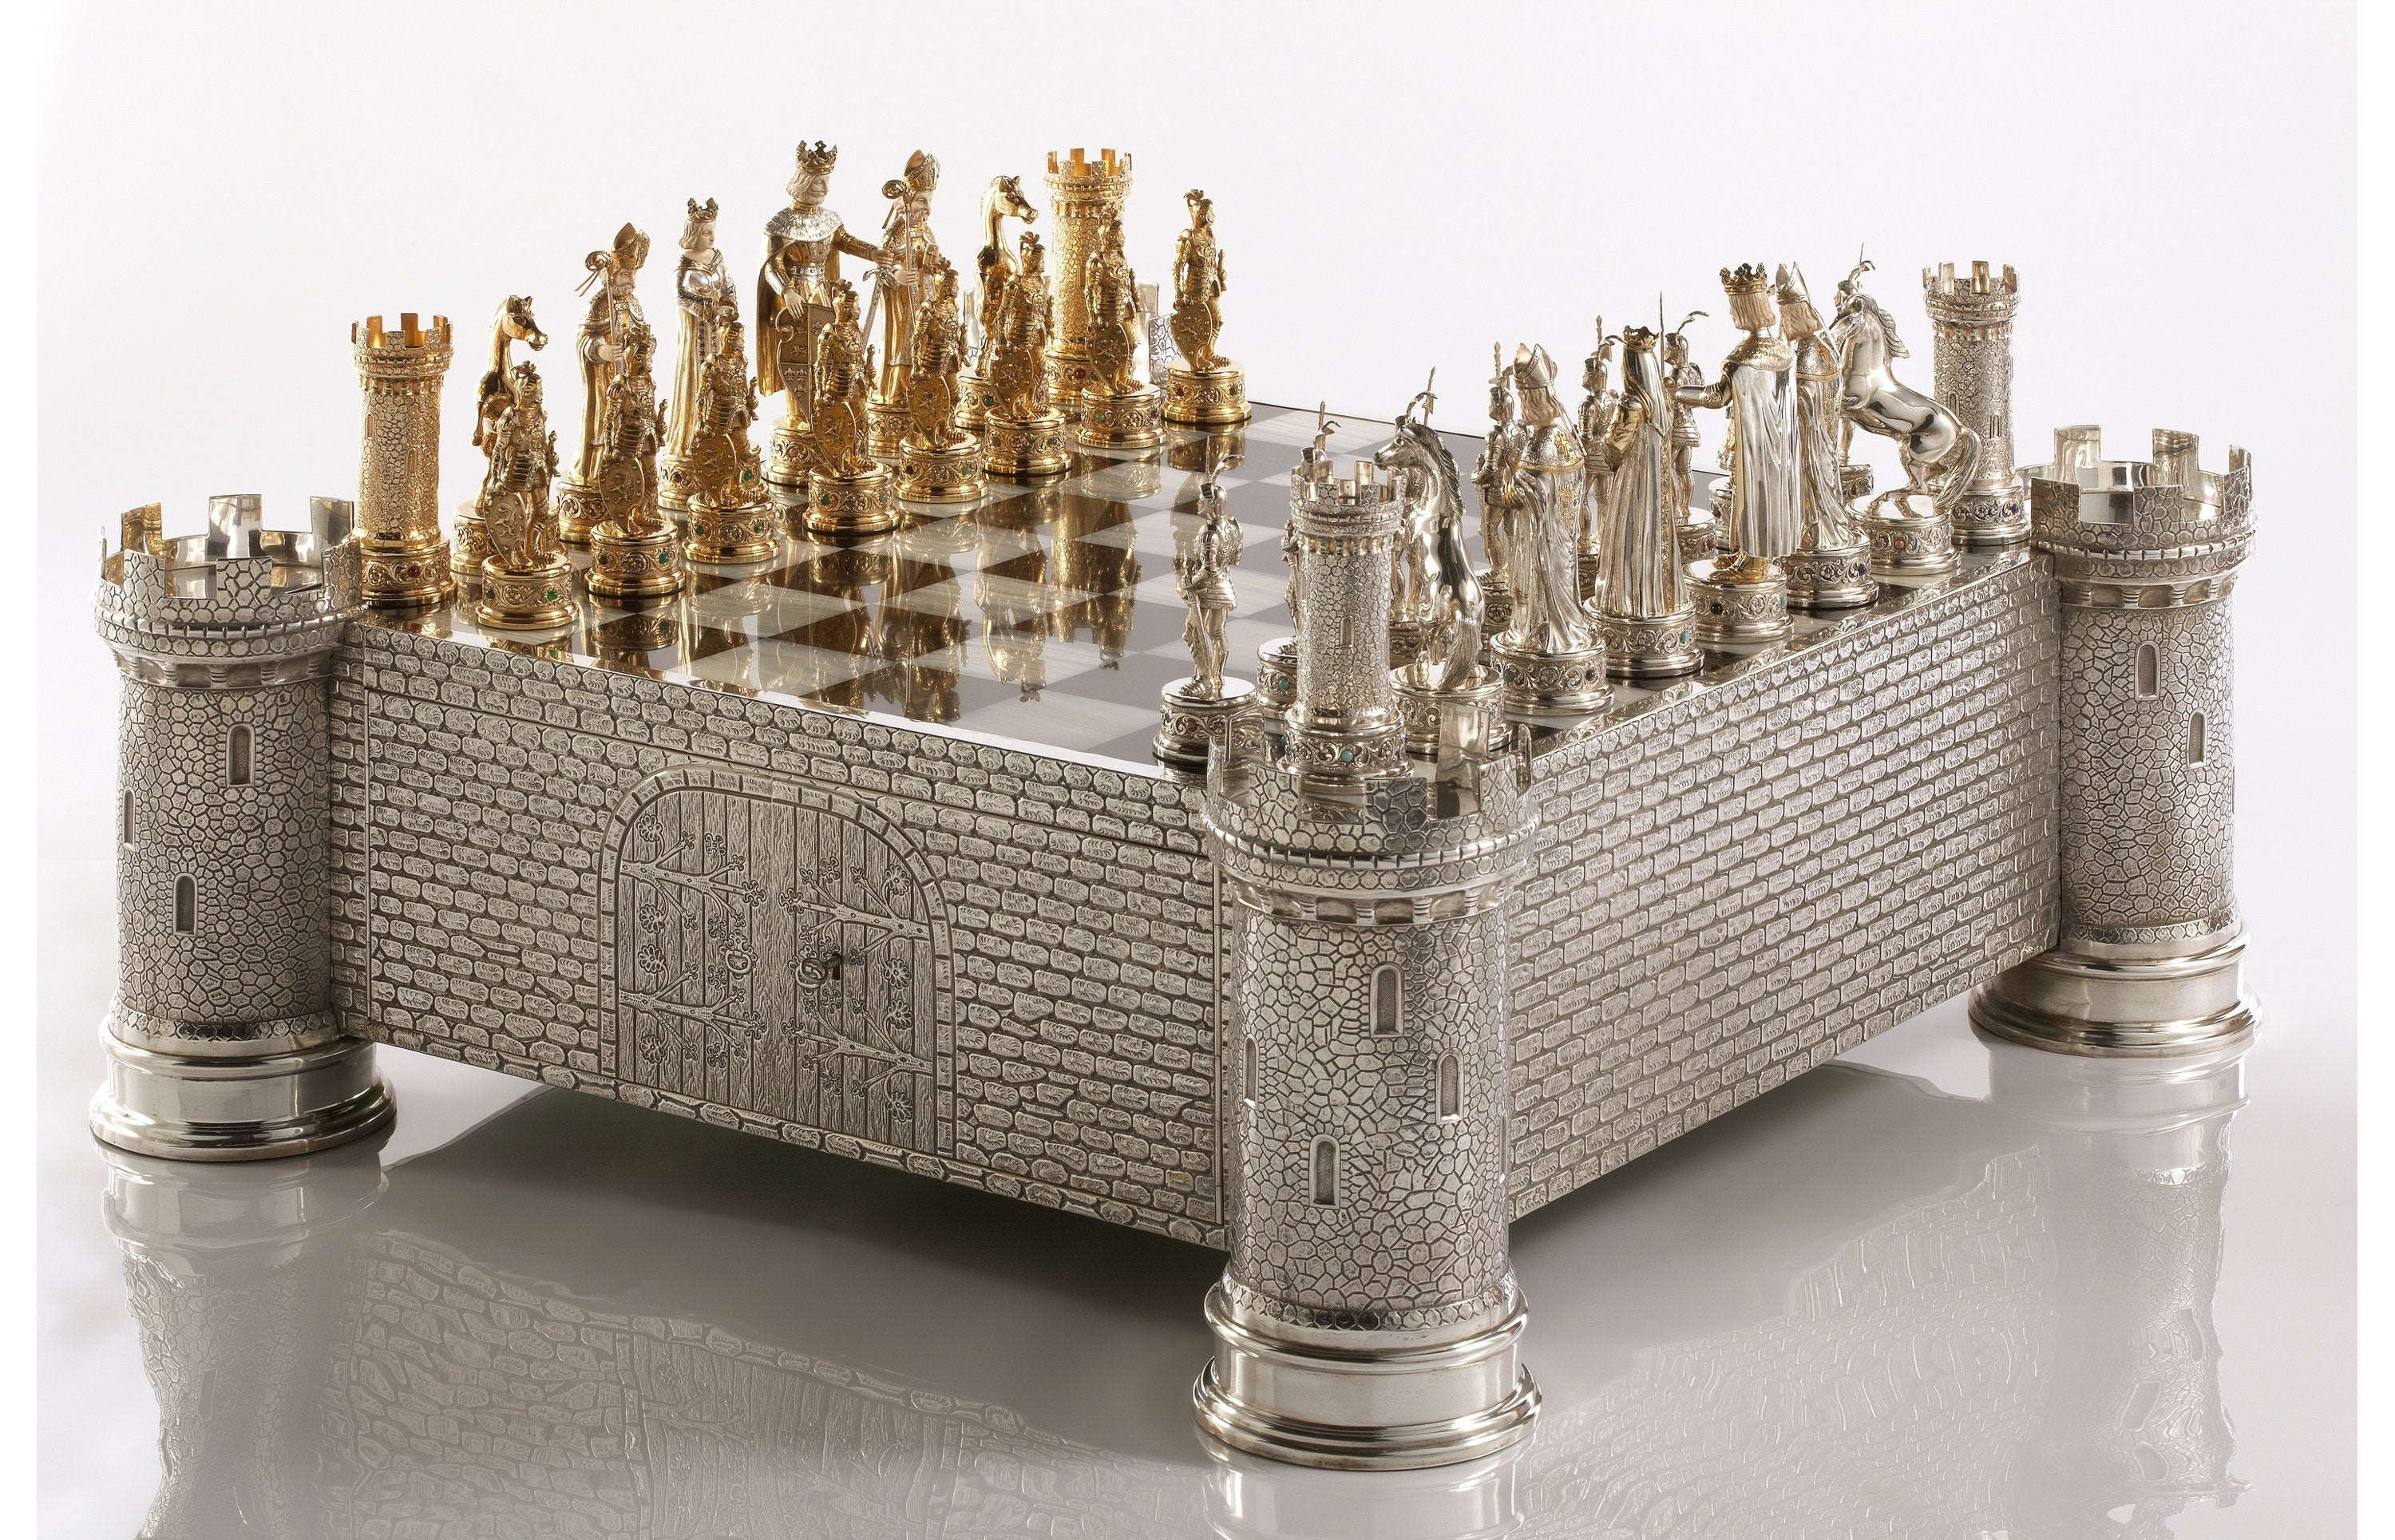 Really semiconductor Offer jewel royale chess set Downtown Ready Electrify